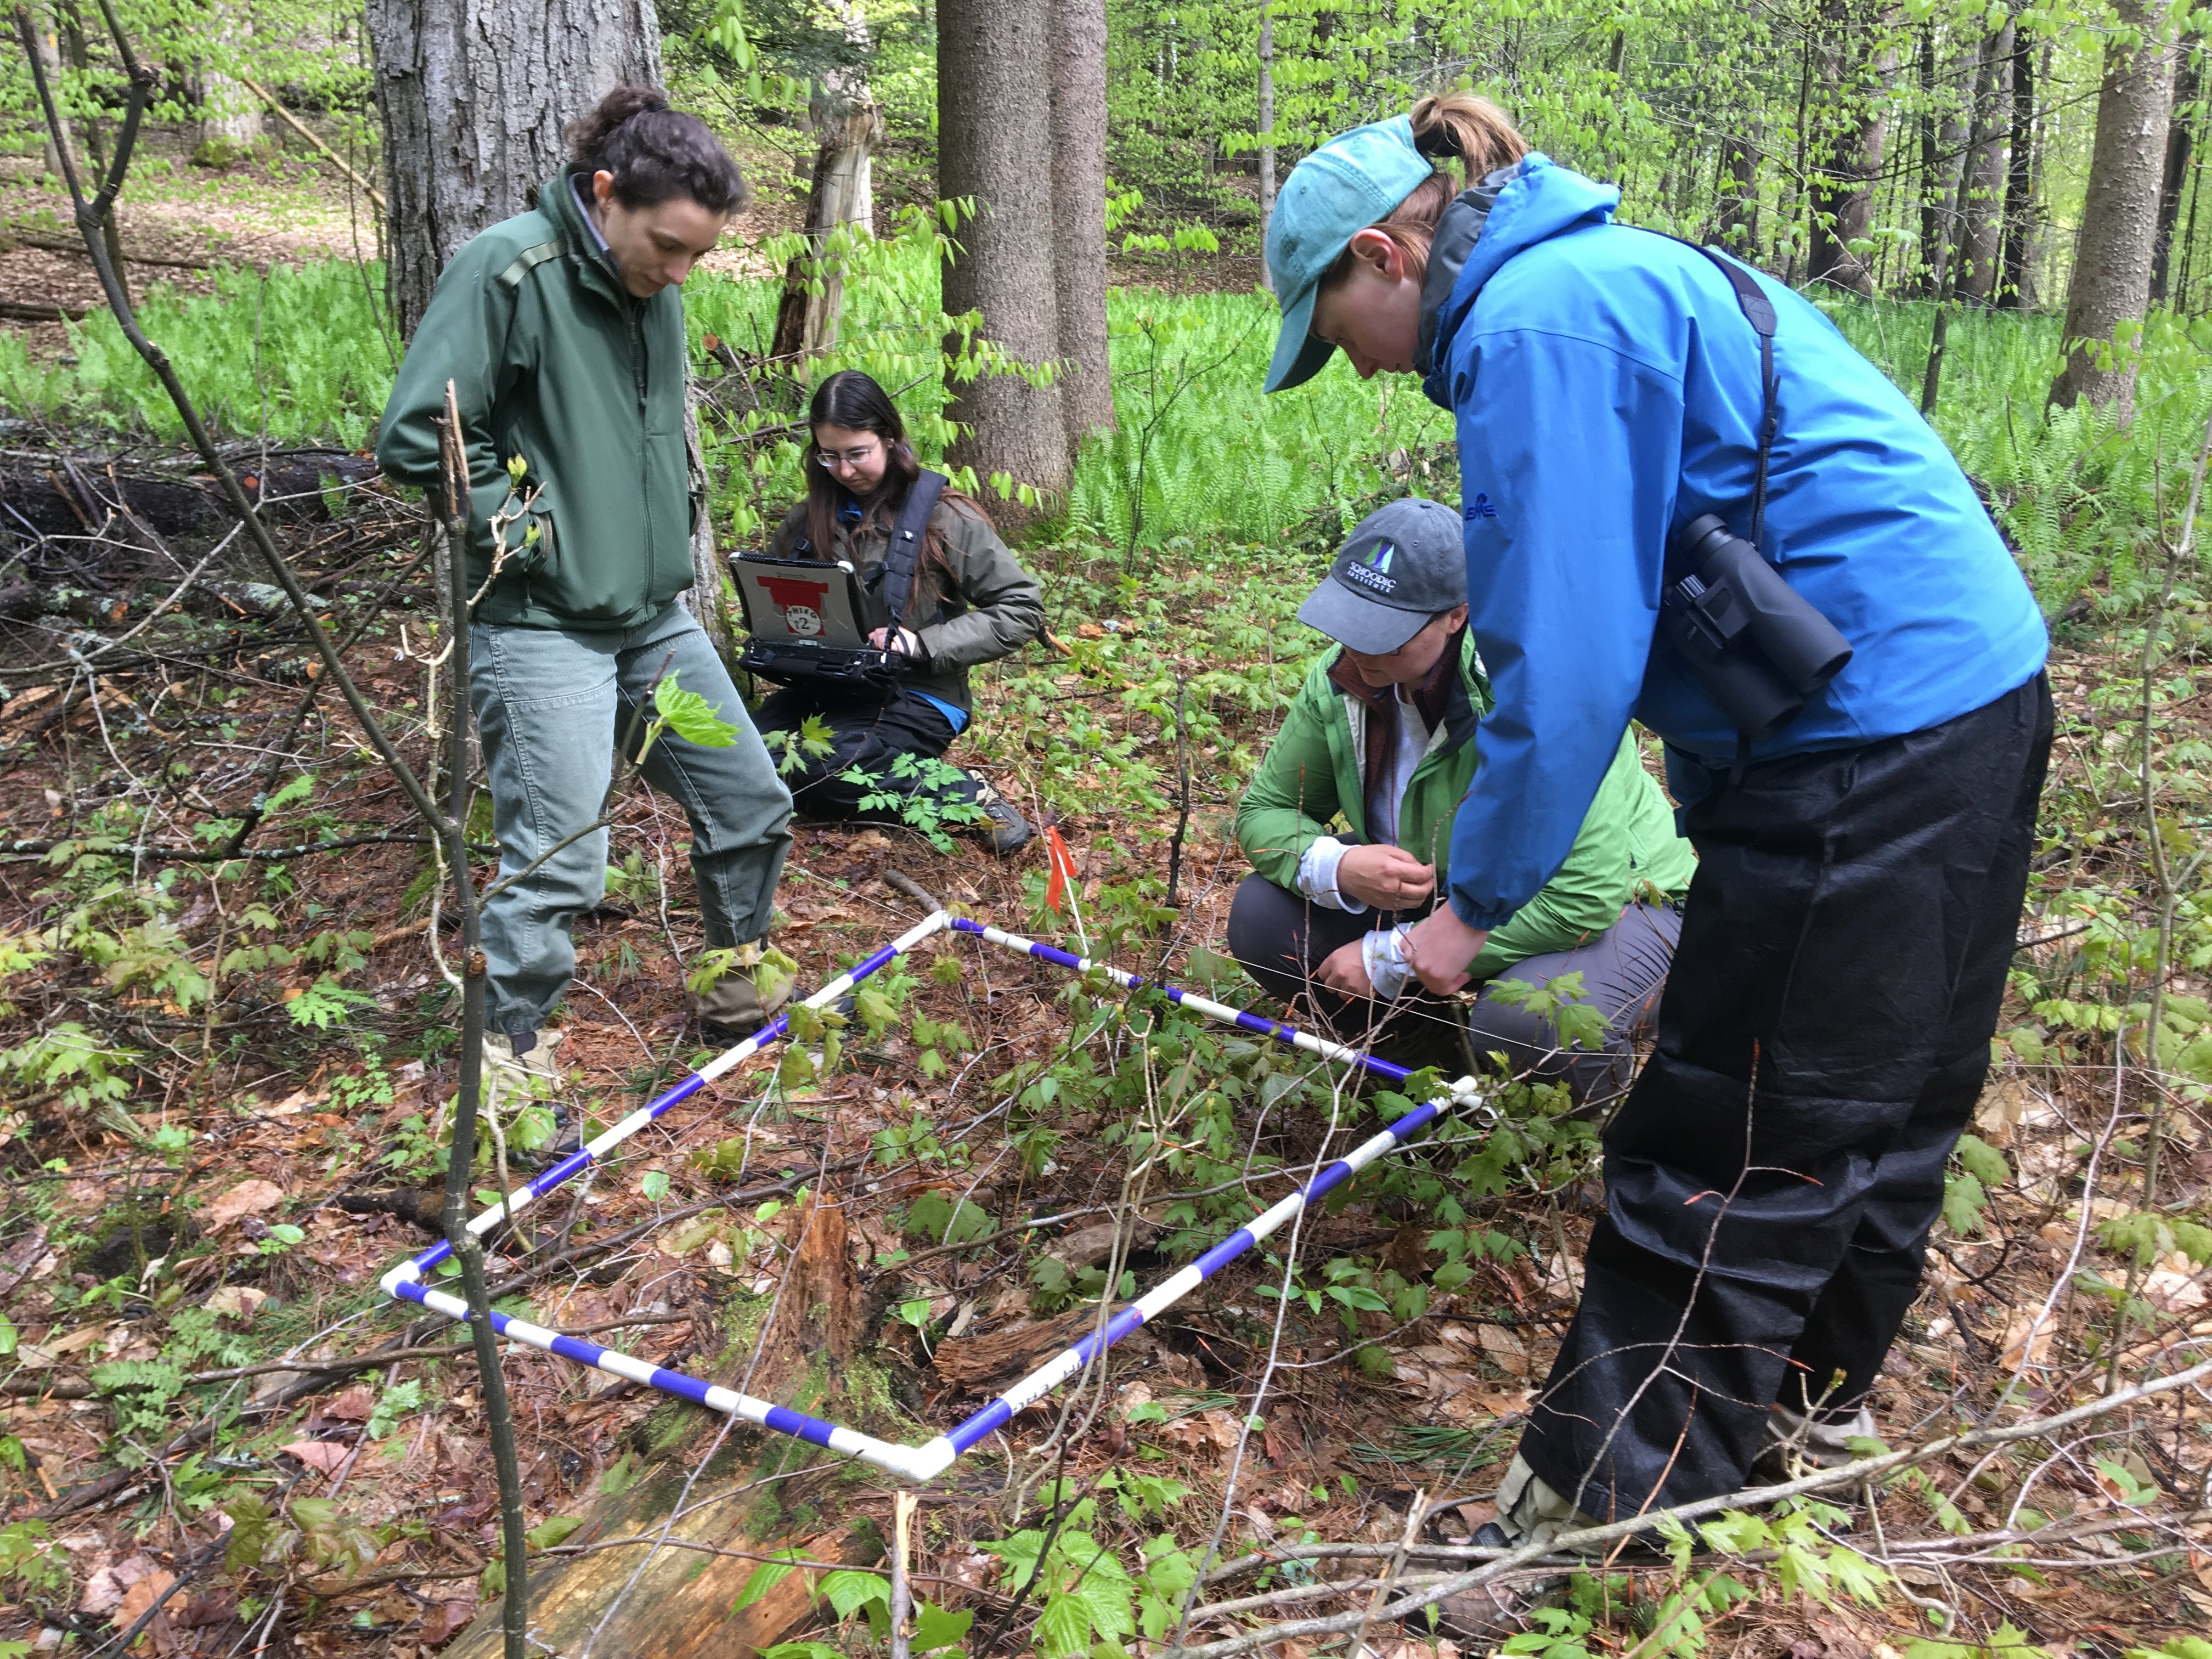 Myself and co-workers doing Quadrant Plant Identification in New Hampshire, May 2019